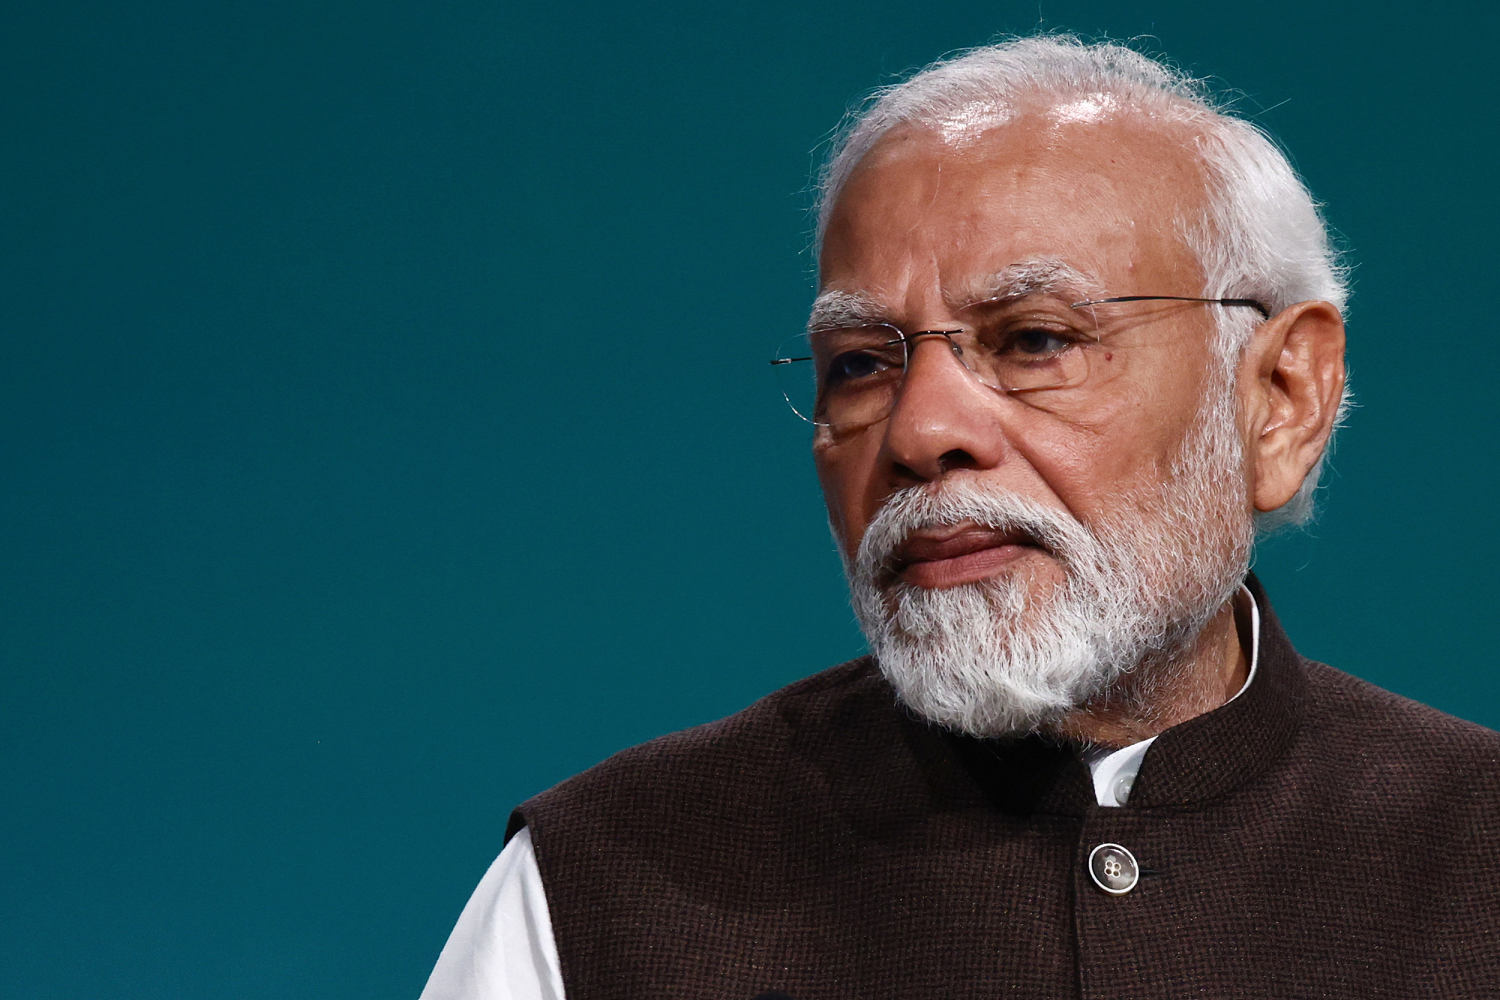 PM Modi accused of hate speech for calling Muslims 'infiltrators' at rally days into India's election